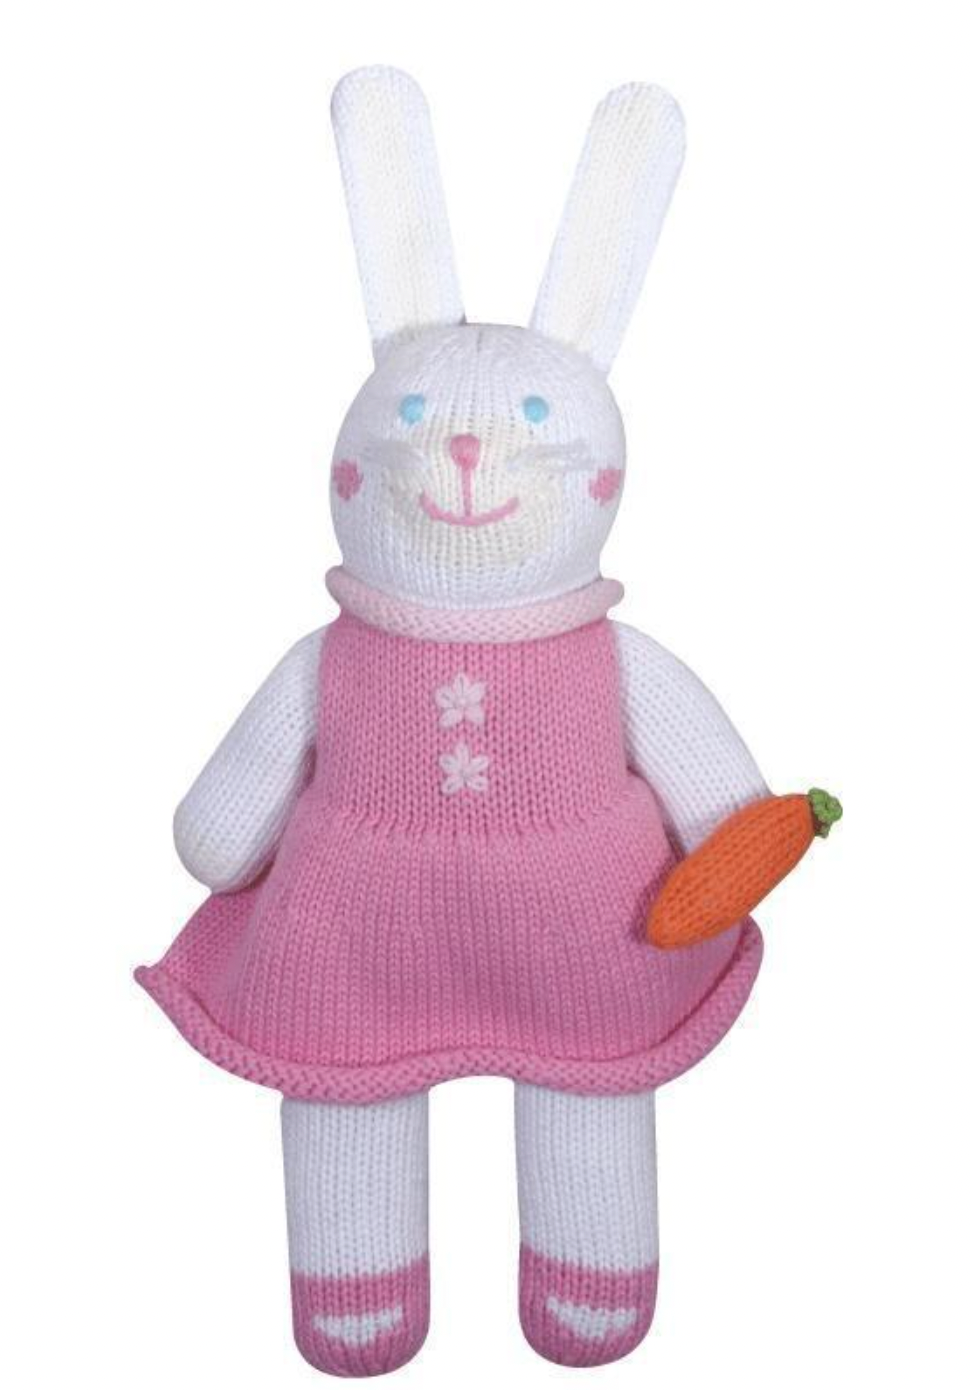 Harriet the Bunny Knit Doll